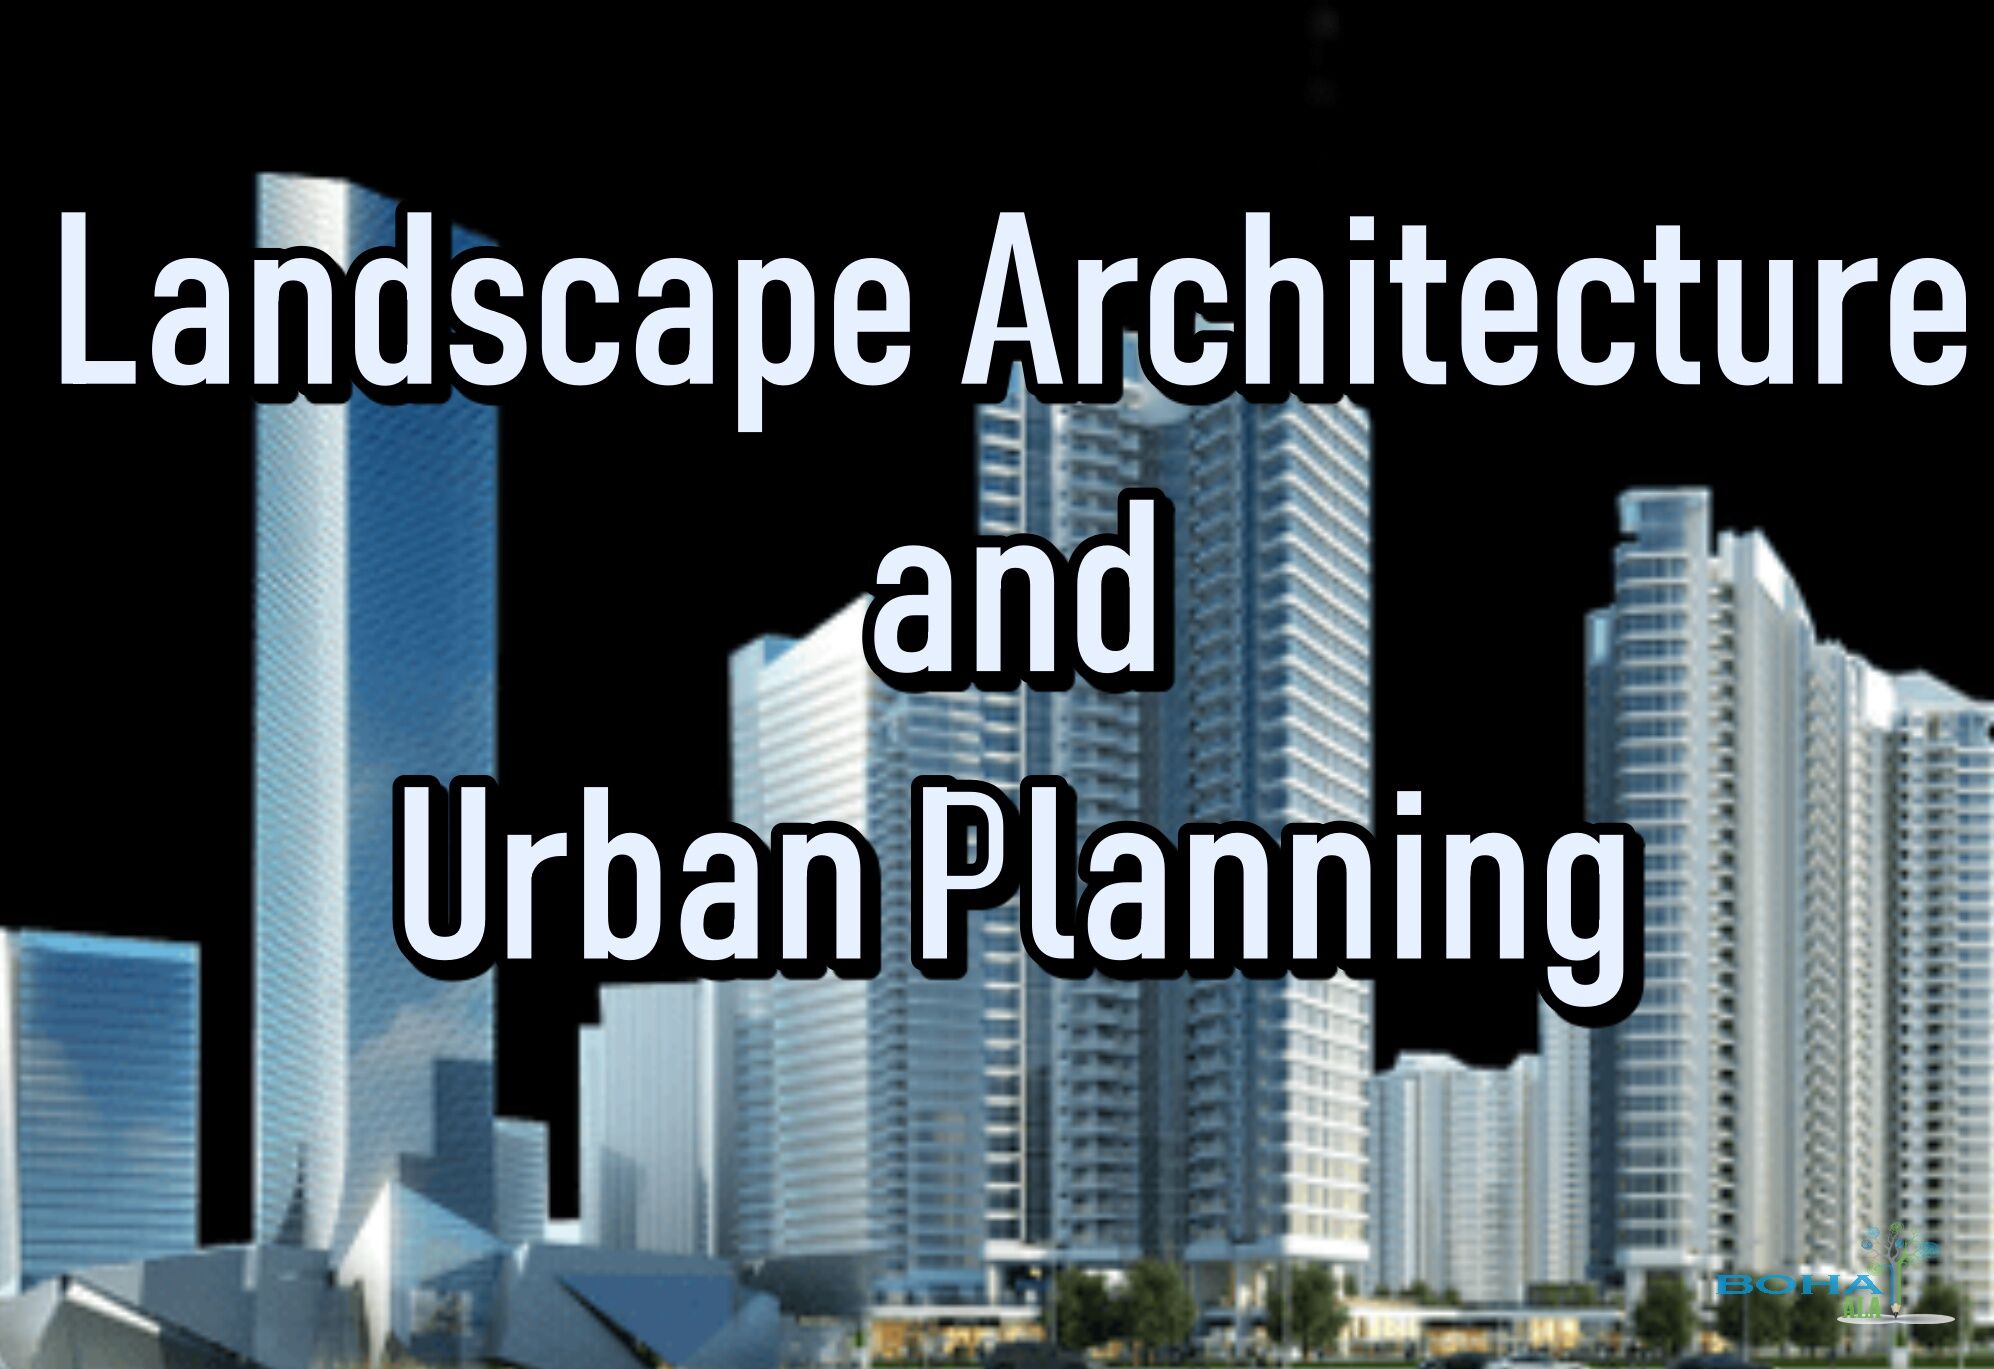 Landscape Architecture and Urban Planning